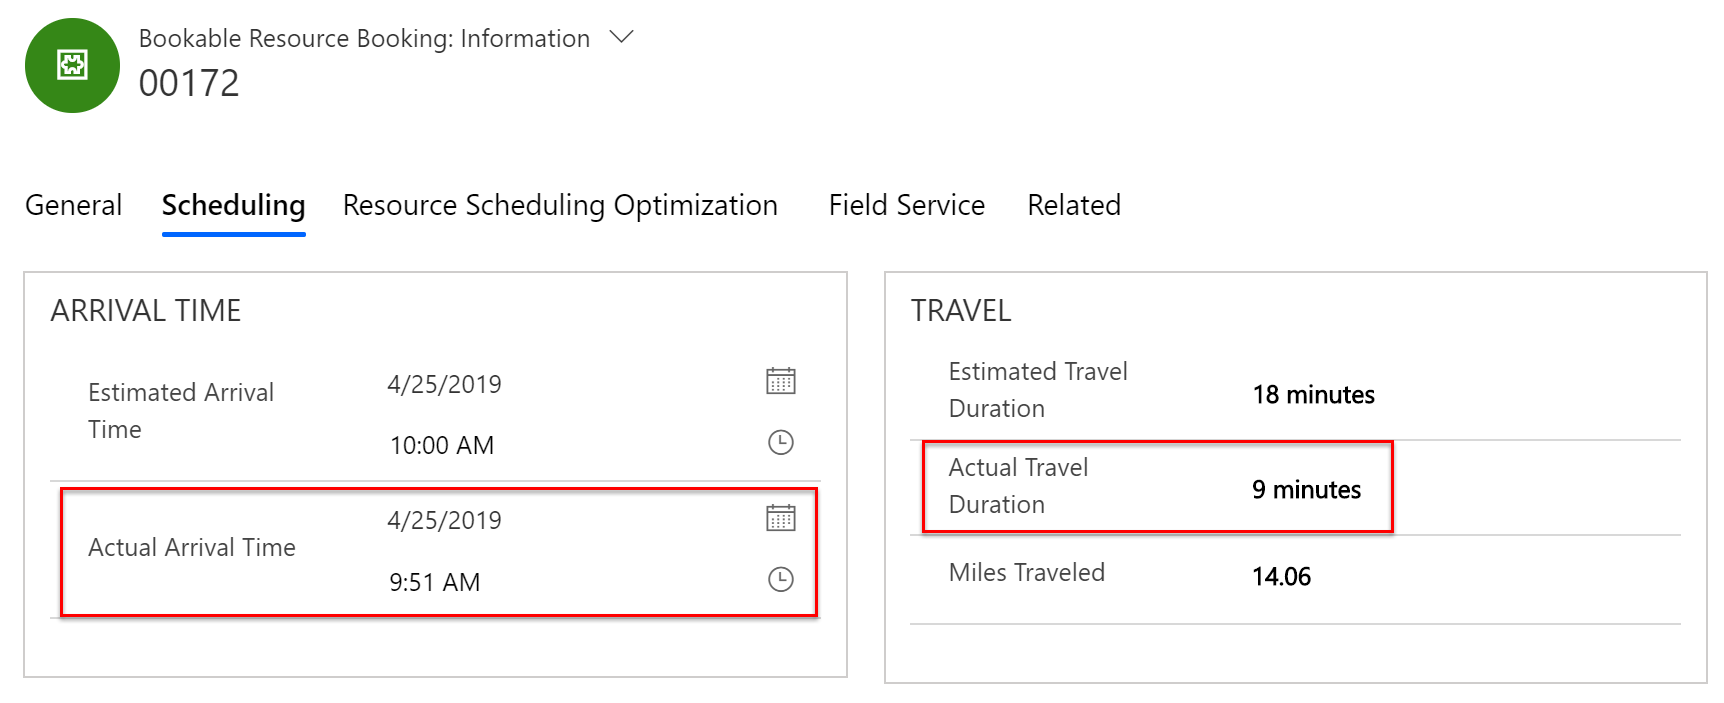 Screenshot of the Booking Information window, showing the Scheduling tab with the Actual Arrival Time and Actual Travel Duration highlighted with a red border.